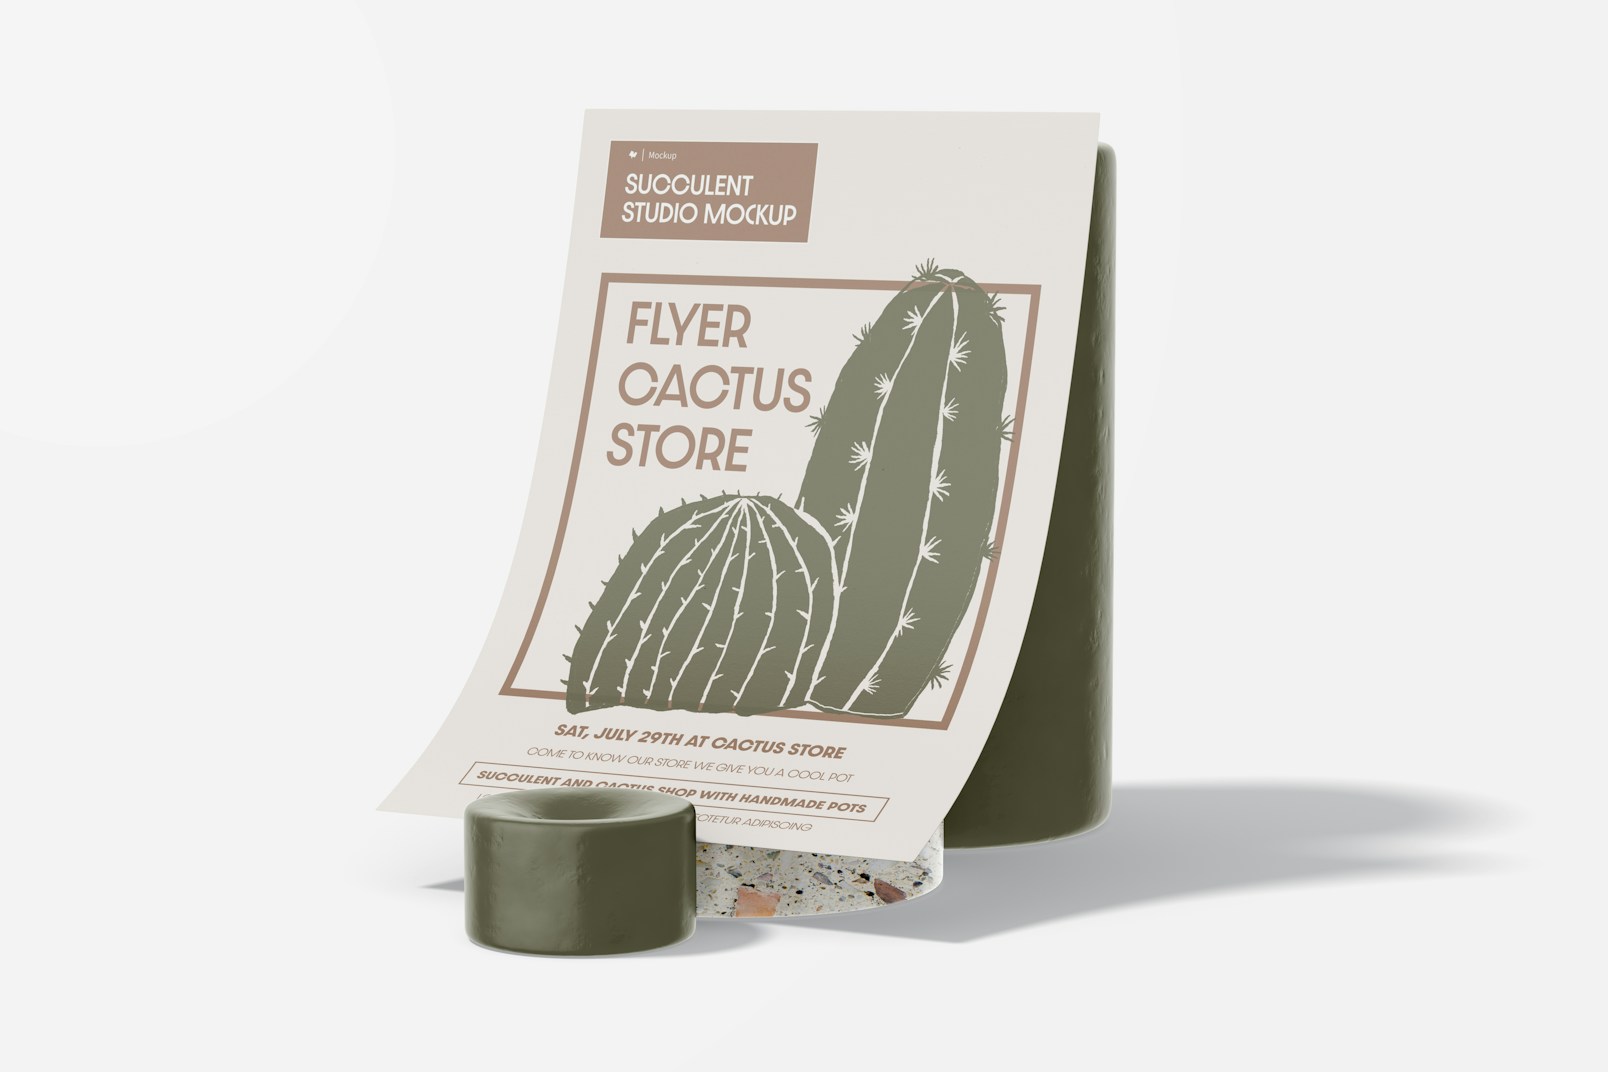 Flyer Cactus Store Mockup, Side View